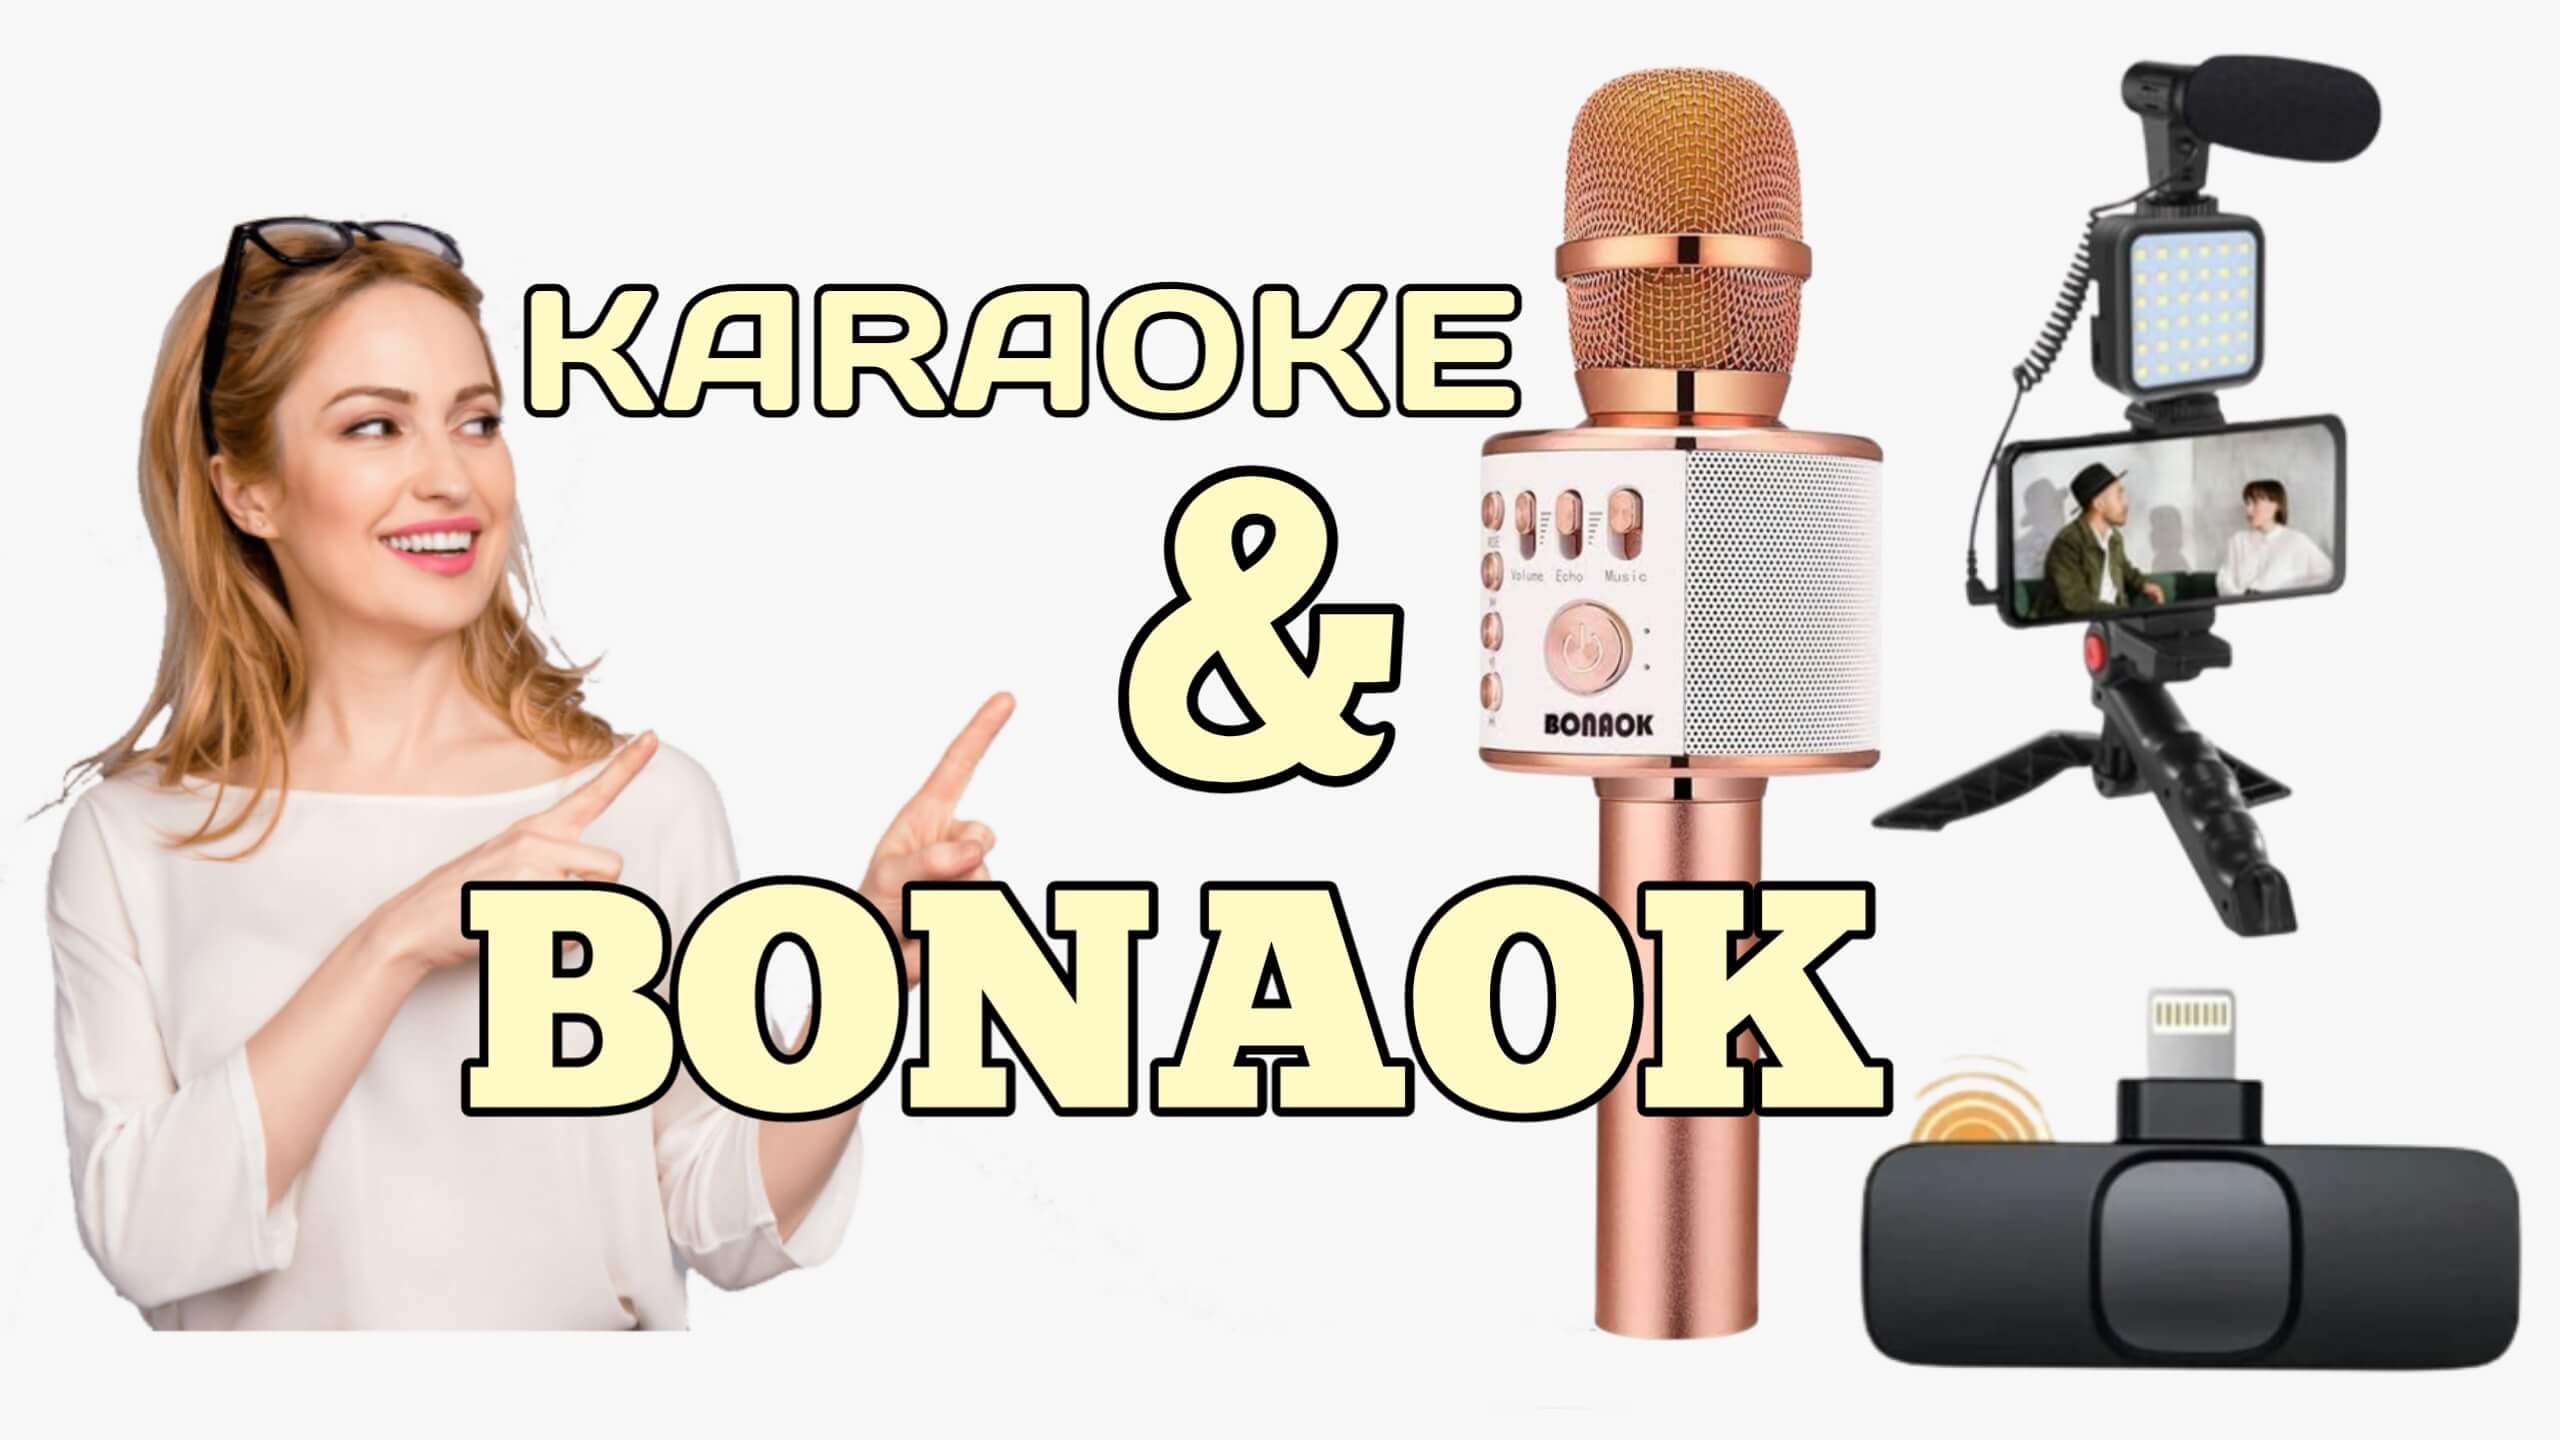 How to charge a wireless microphone BONAOK and Karaoke